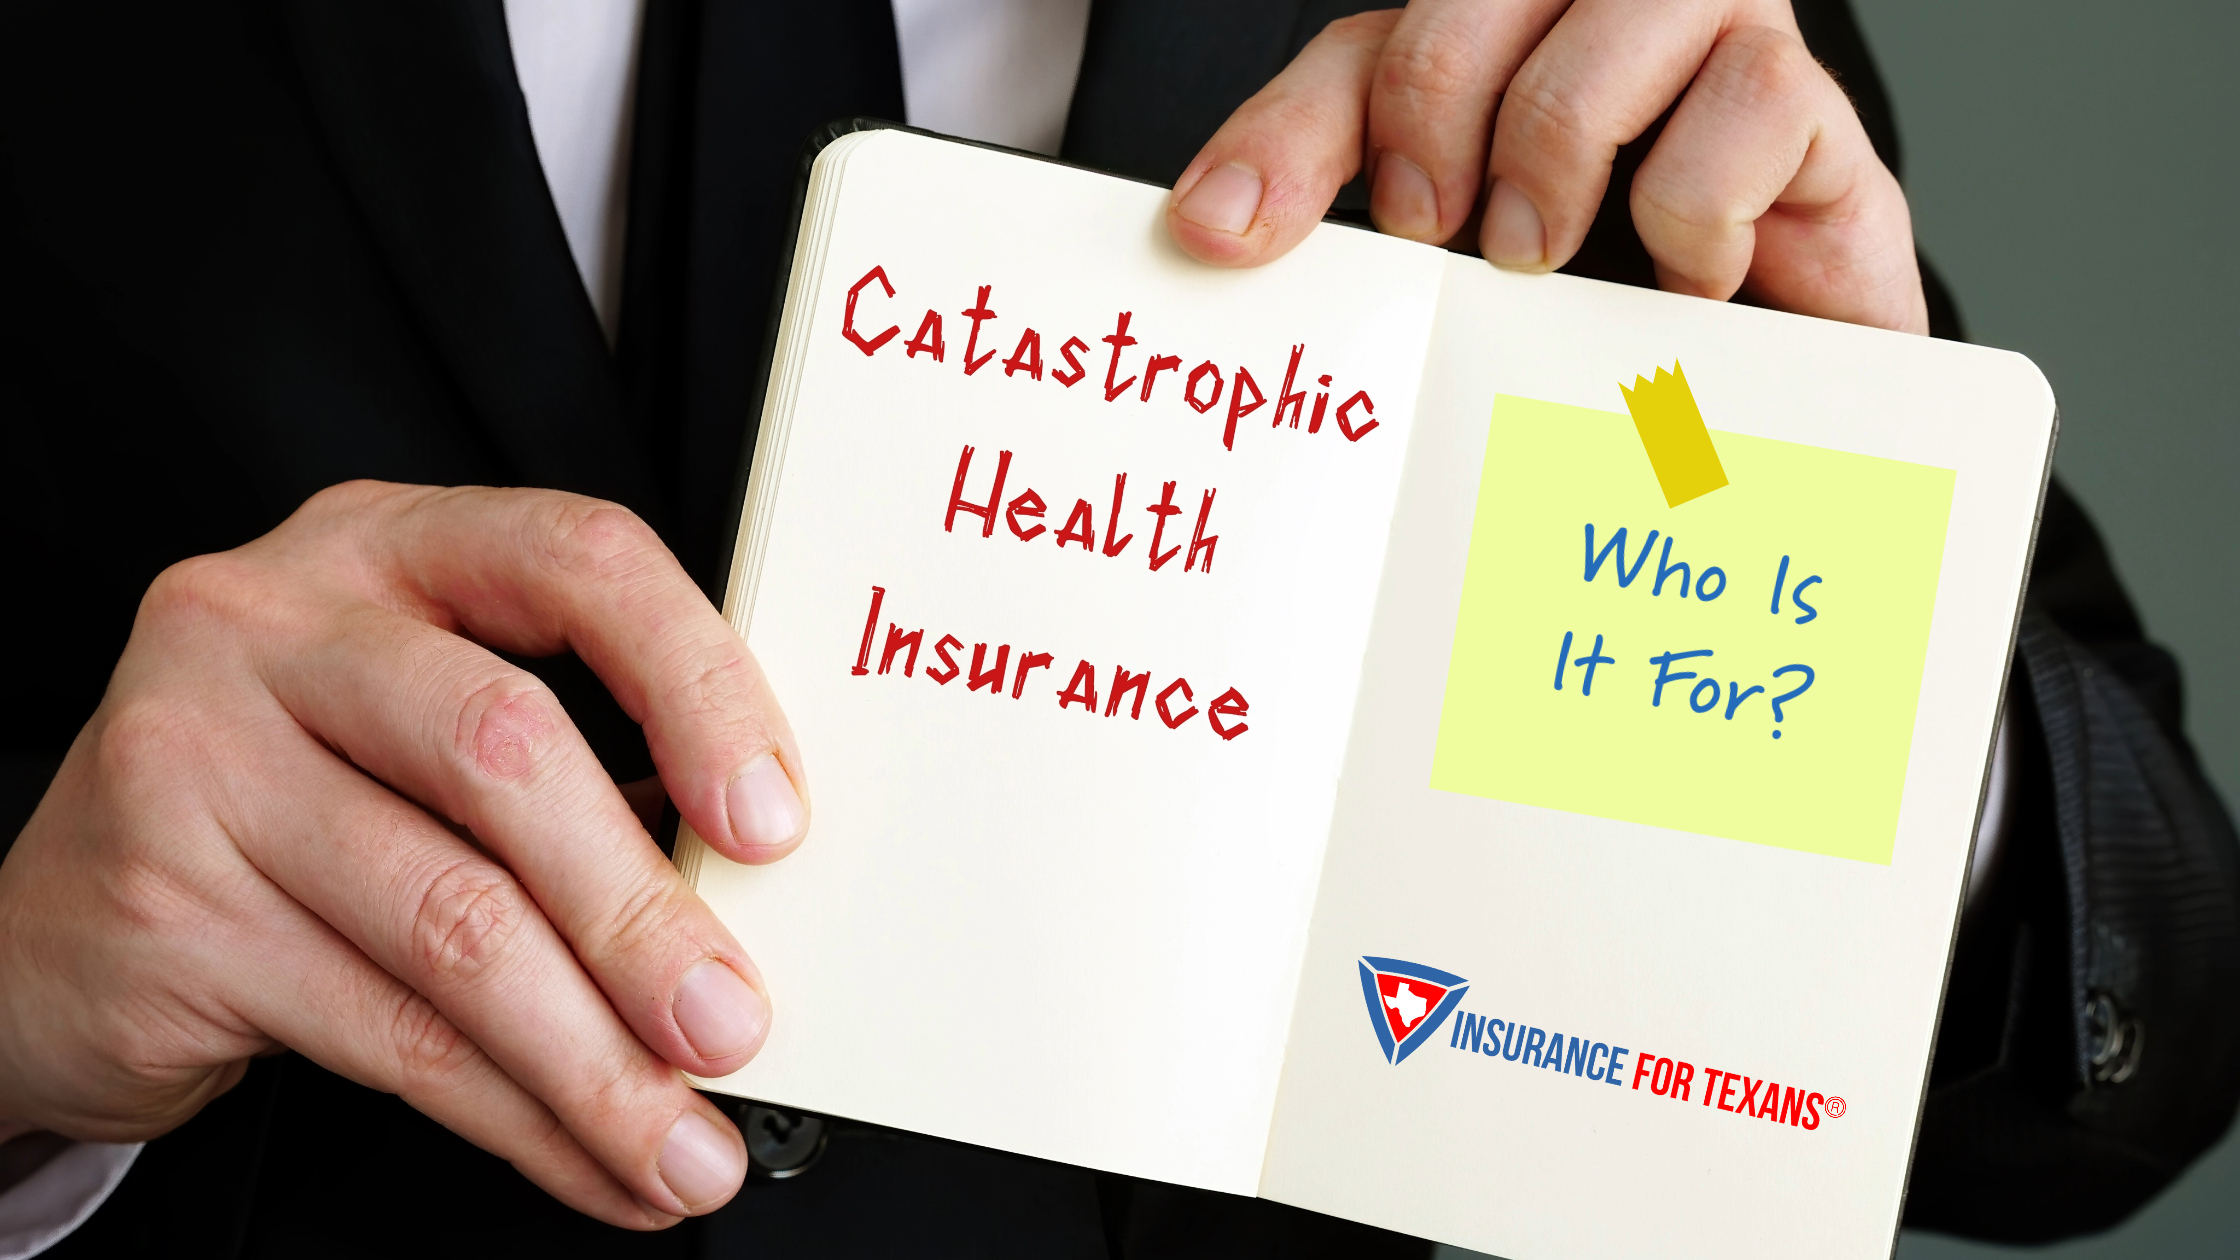 Who Is Catastrophic Health Insurance Right For?